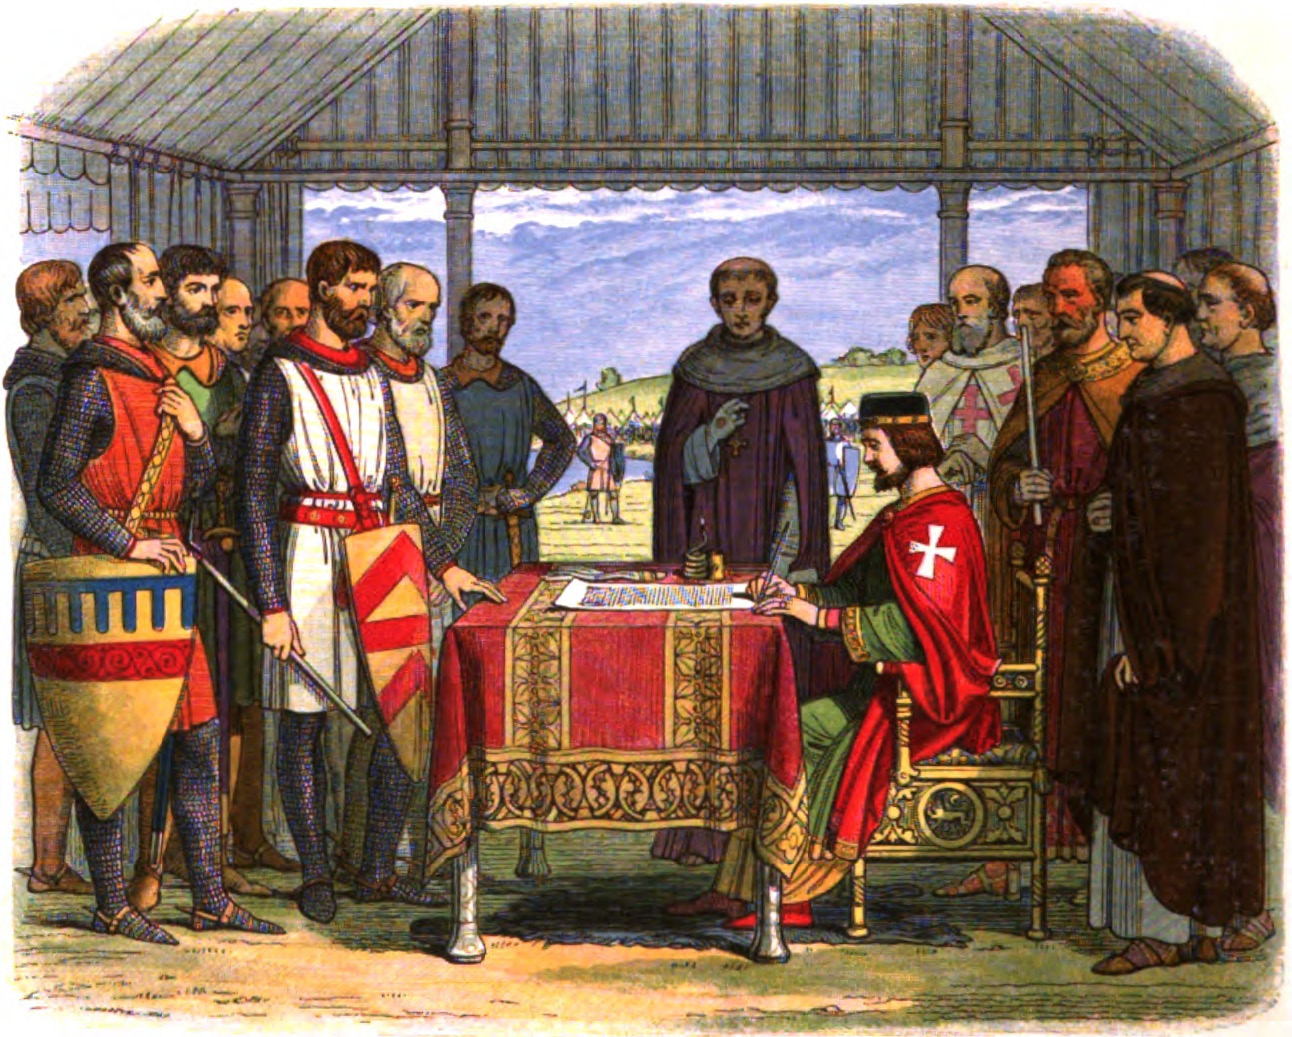 Artist's impression of the signing of Magna Carta